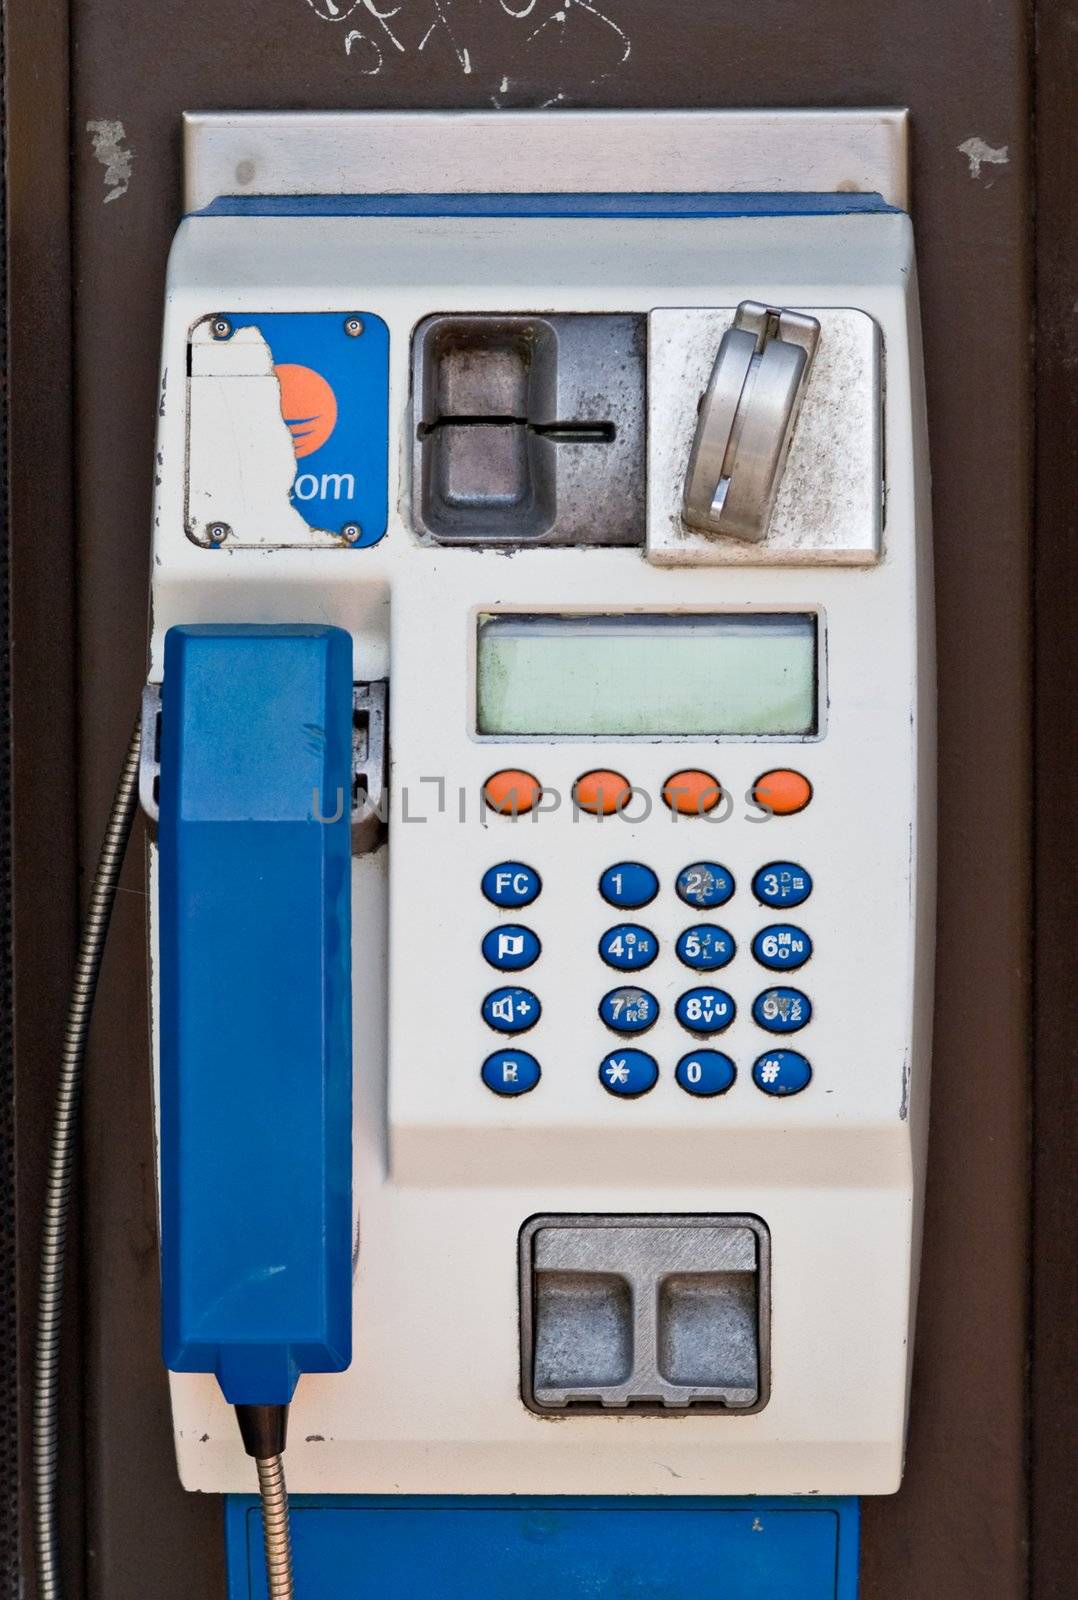 A public payphone in Europe. This particular phonebooth was found in Galway City, Ireland.